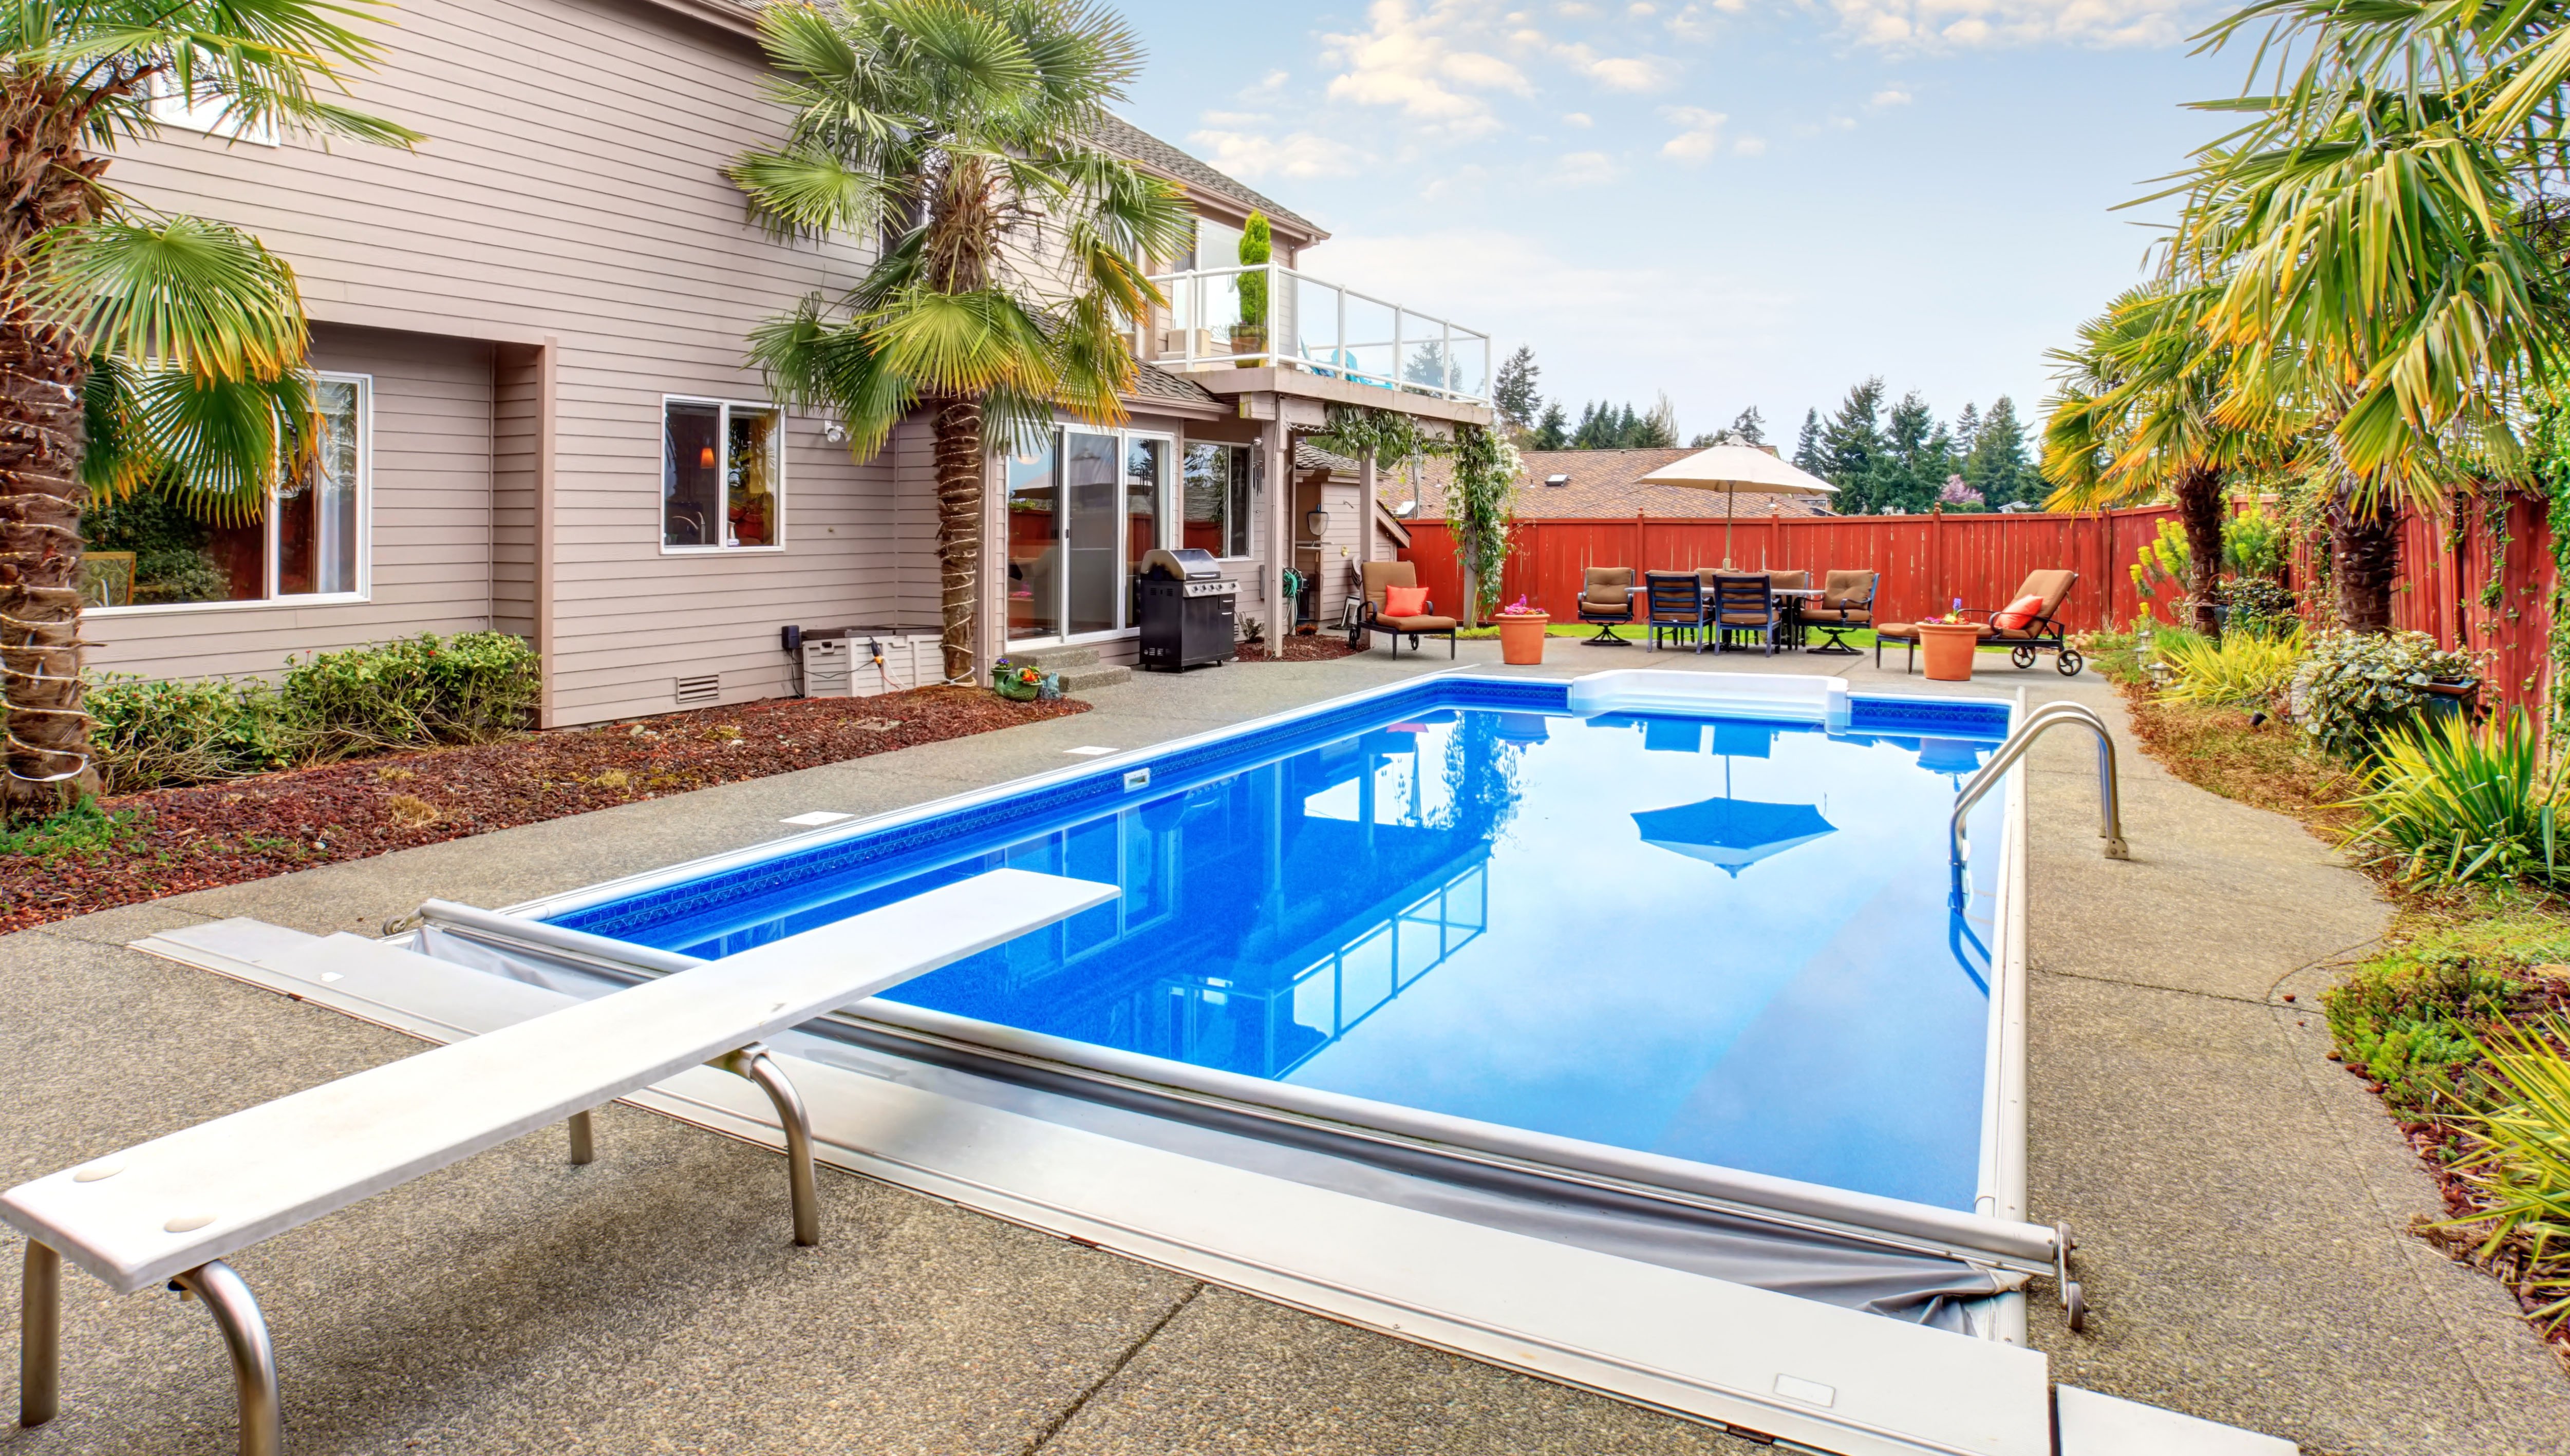 What Is the Cheapest Inground Swimming Pool?